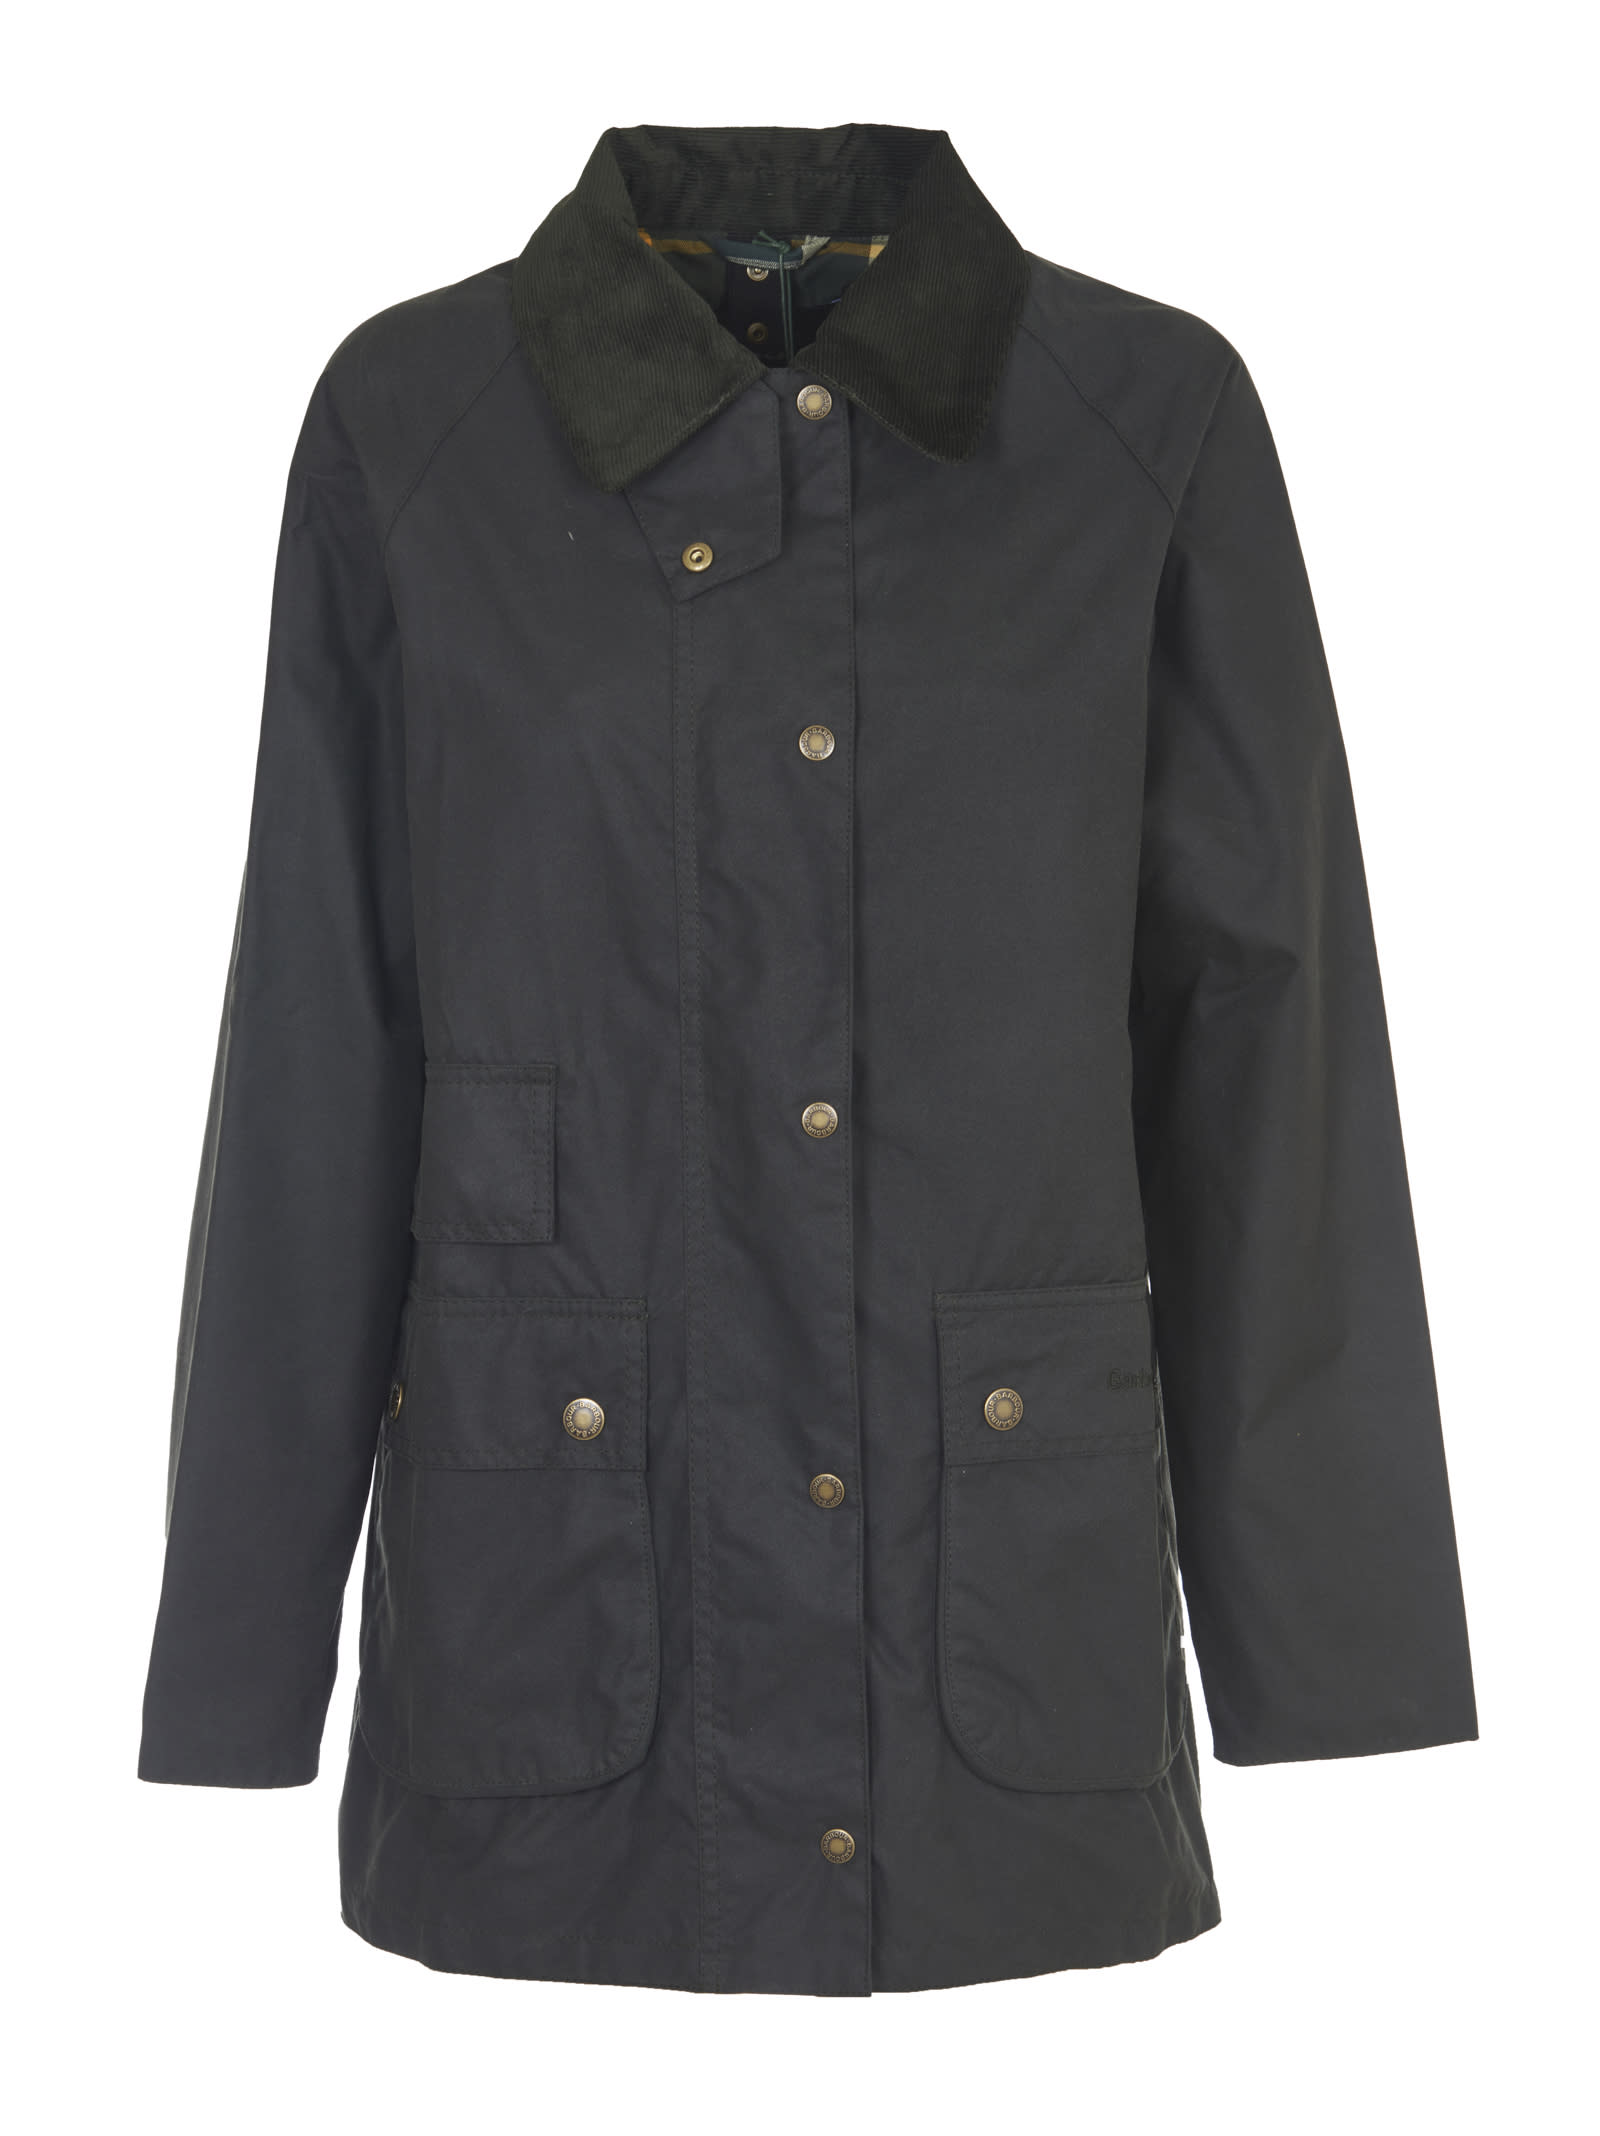 Barbour Tain Wax Jacket